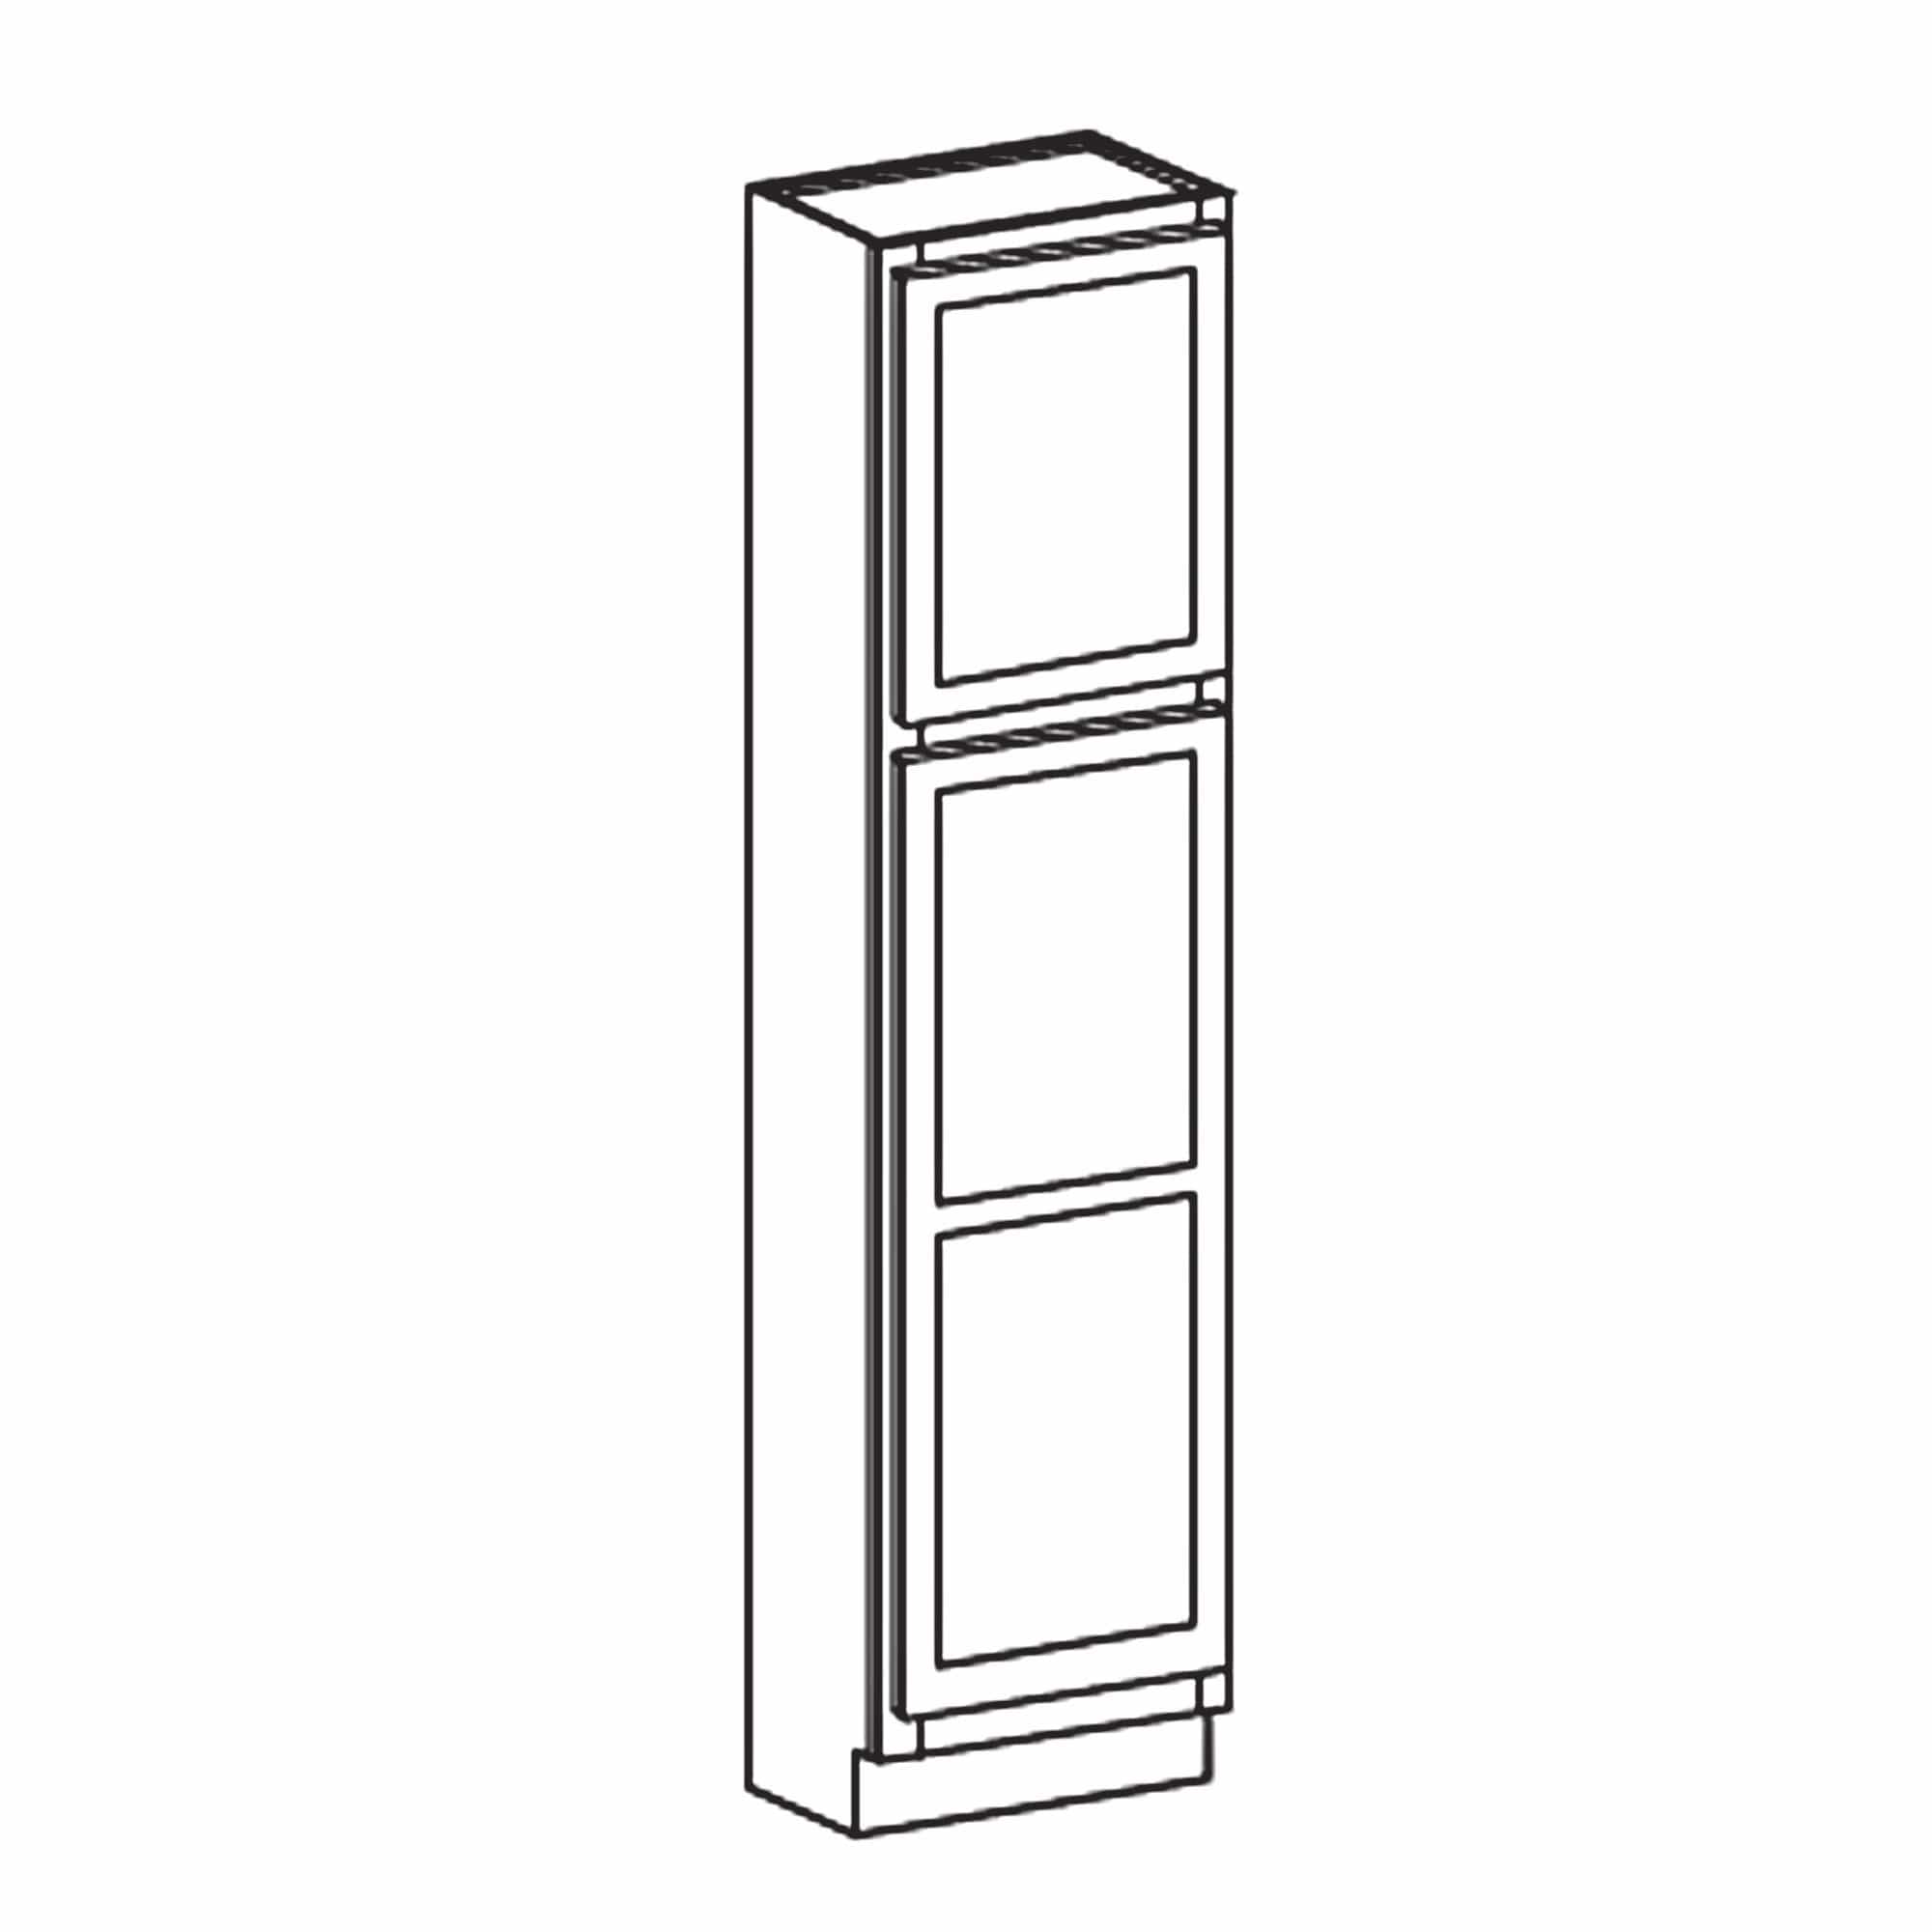 90" Tall Pantry White Shaker 1/2" Overlay Cabinet 18", 24" & 30" Wide